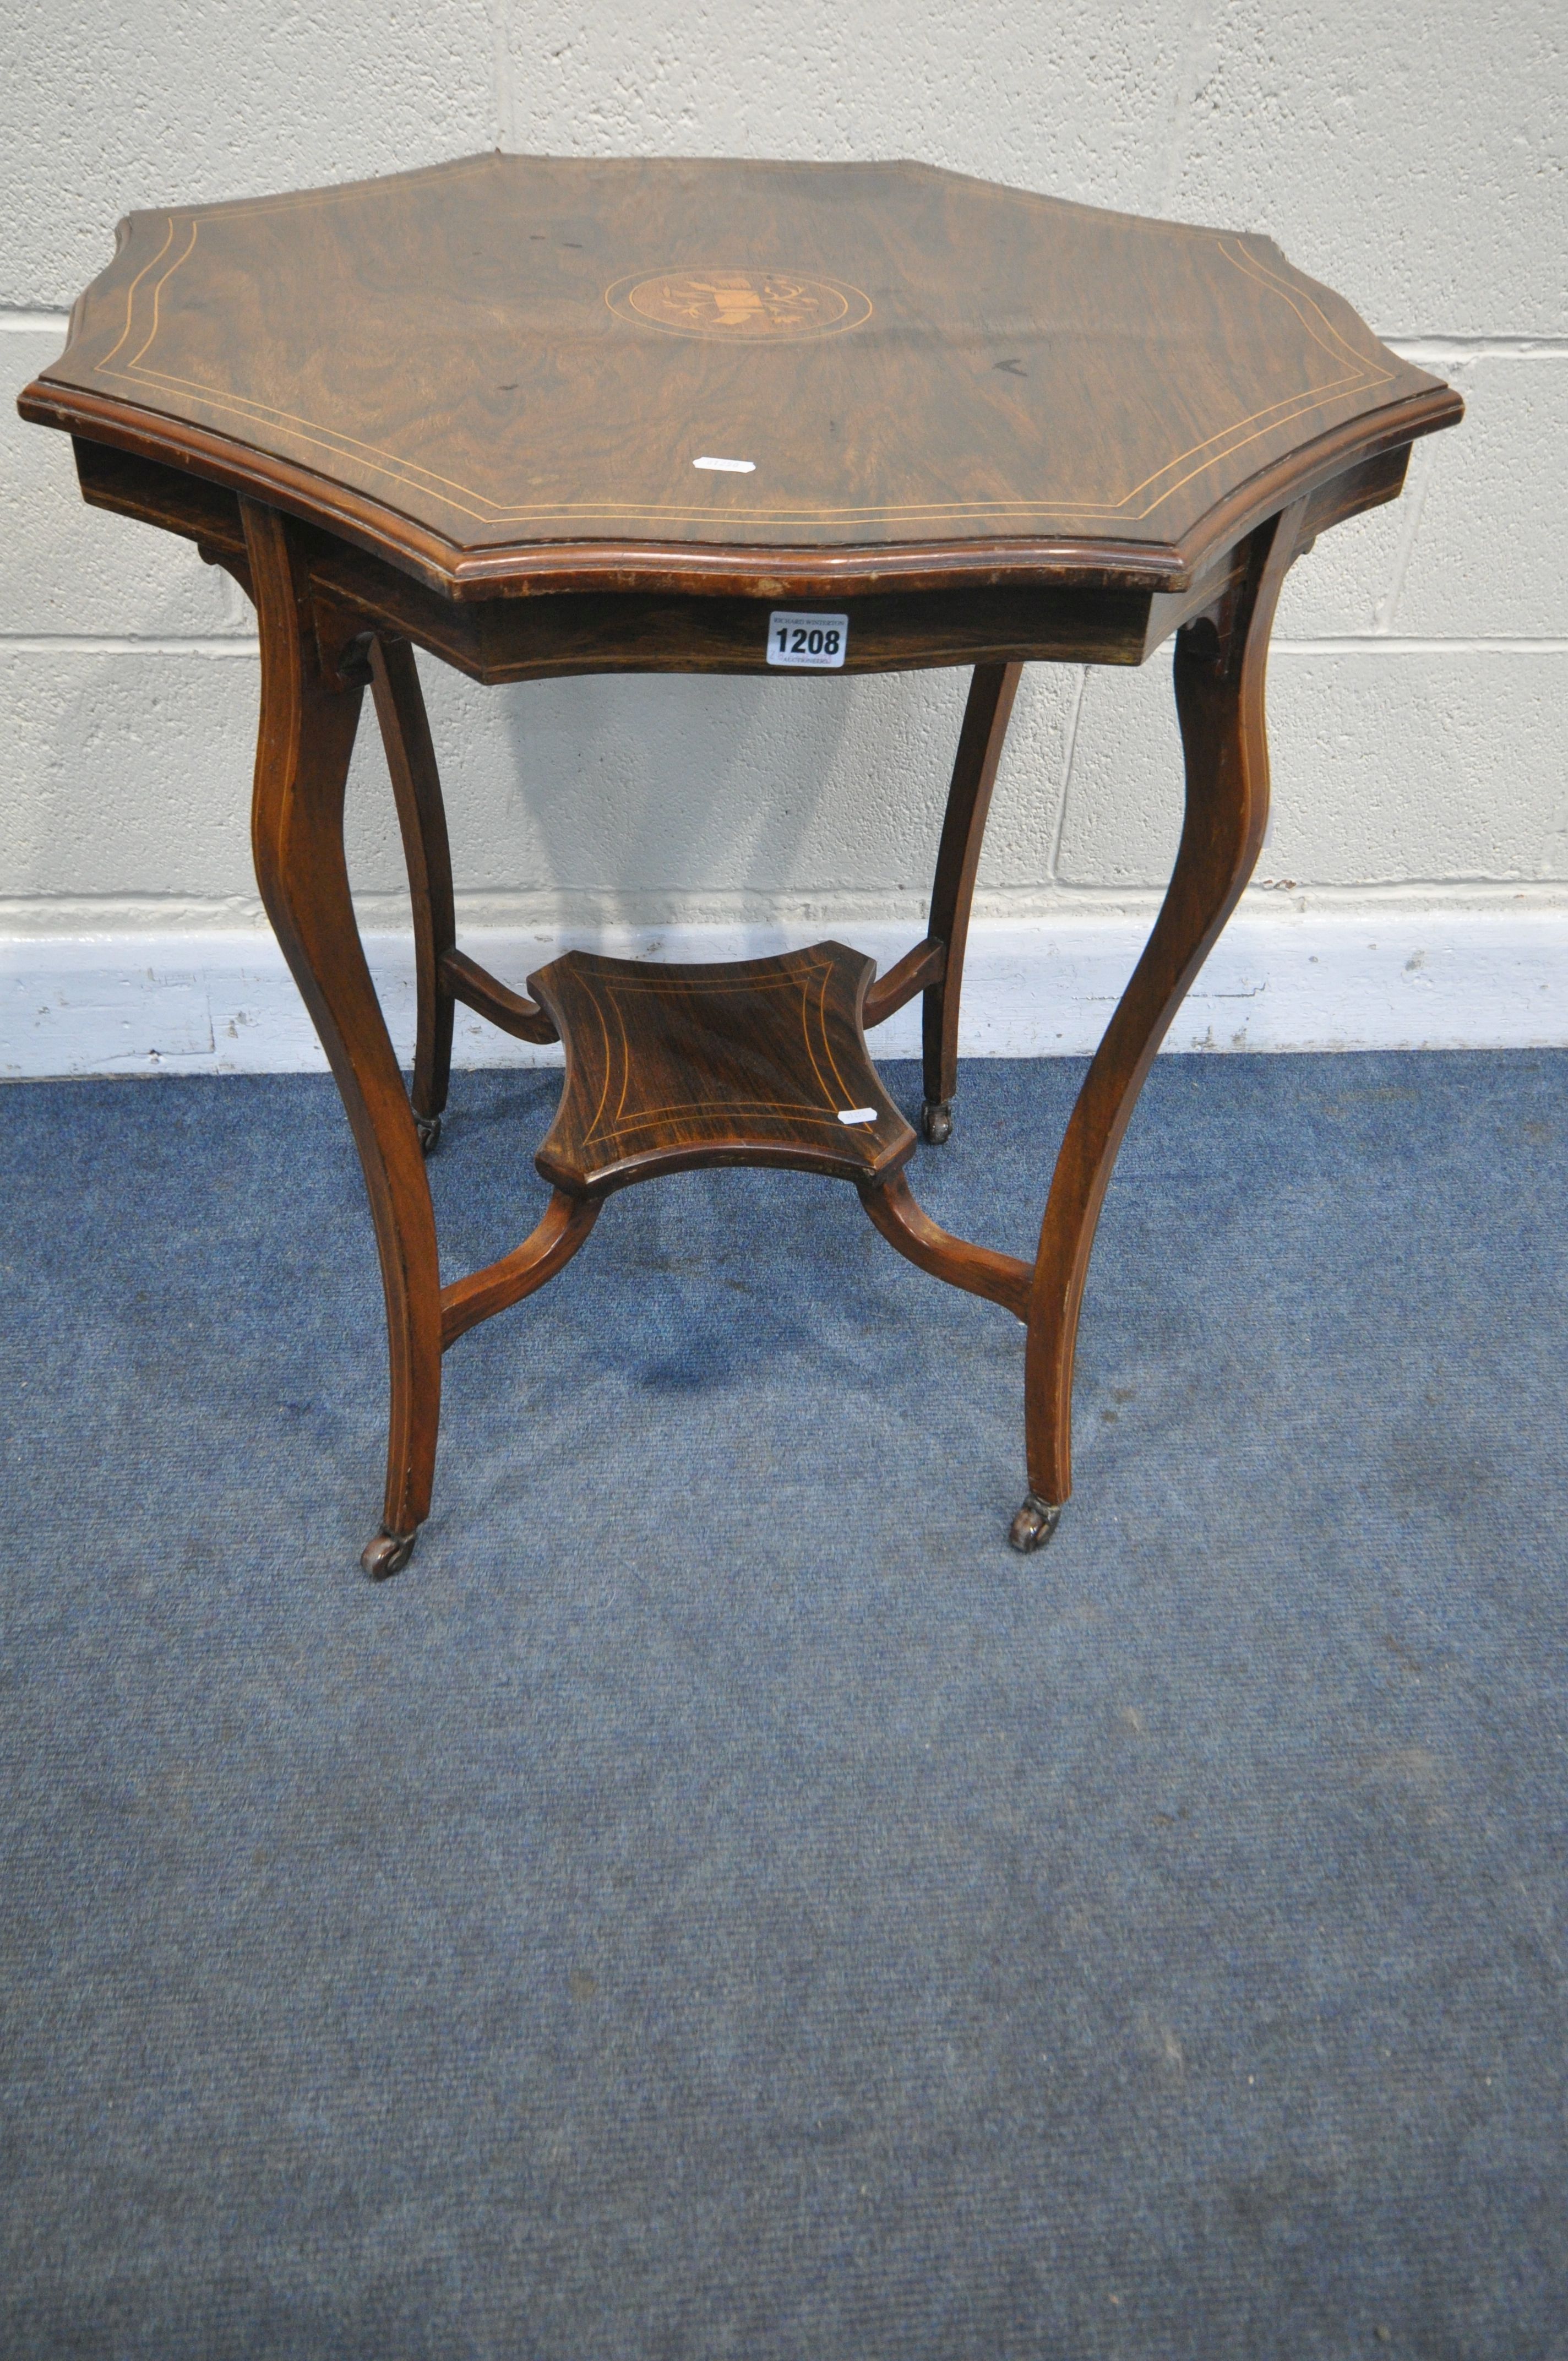 AN EDWARDIAN ROSEWOOD OCTAGONAL CENTRE TABLE, with a wavy edge top, shaped legs and stretchers,